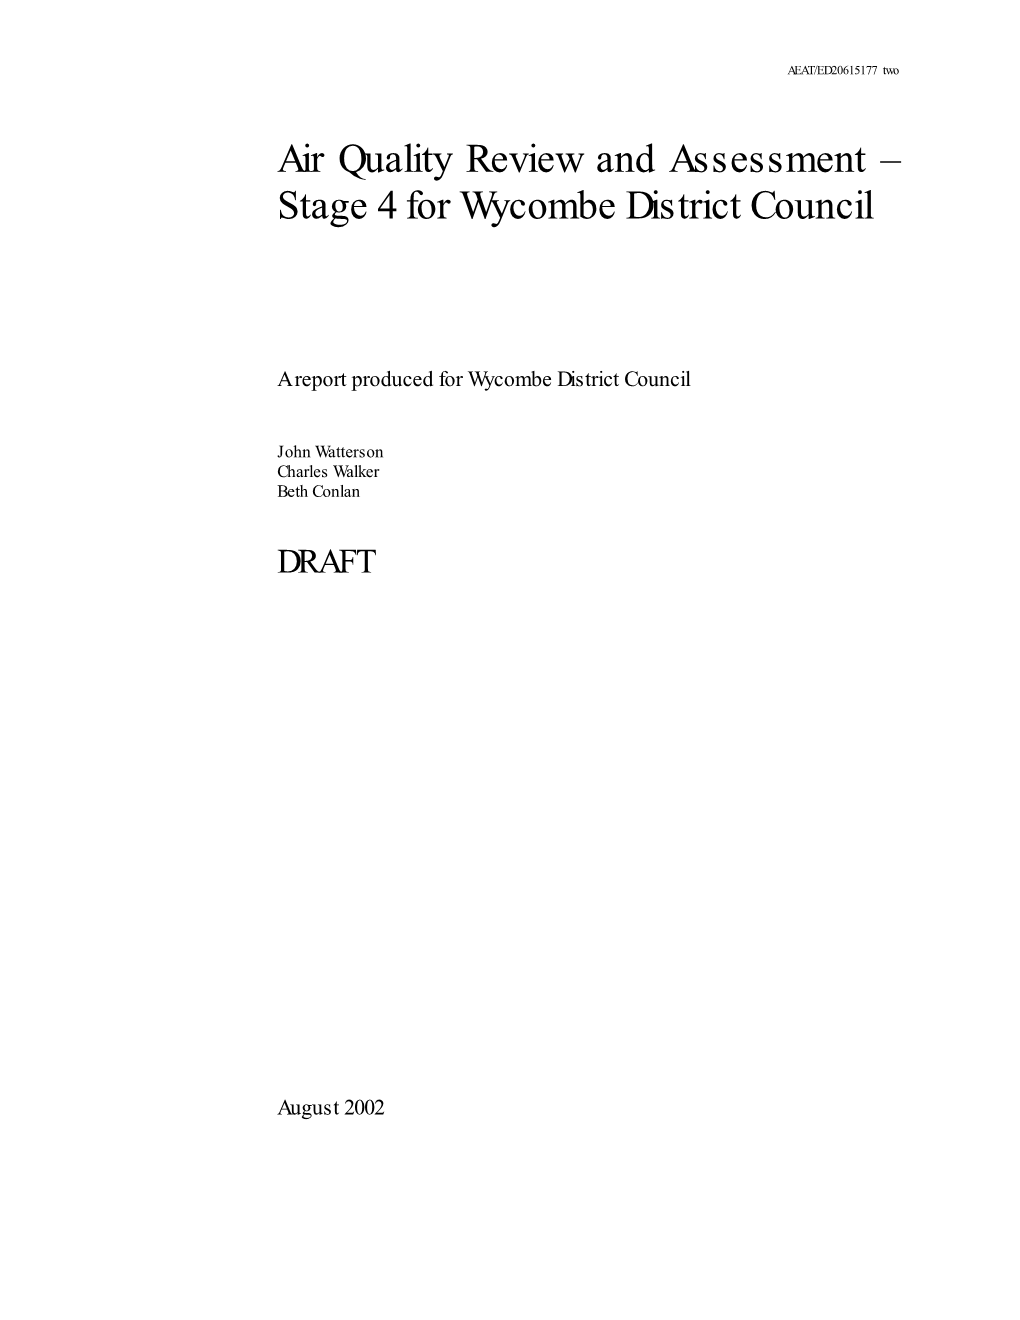 Air Quality Review and Assessment – Stage 4 for Wycombe District Council